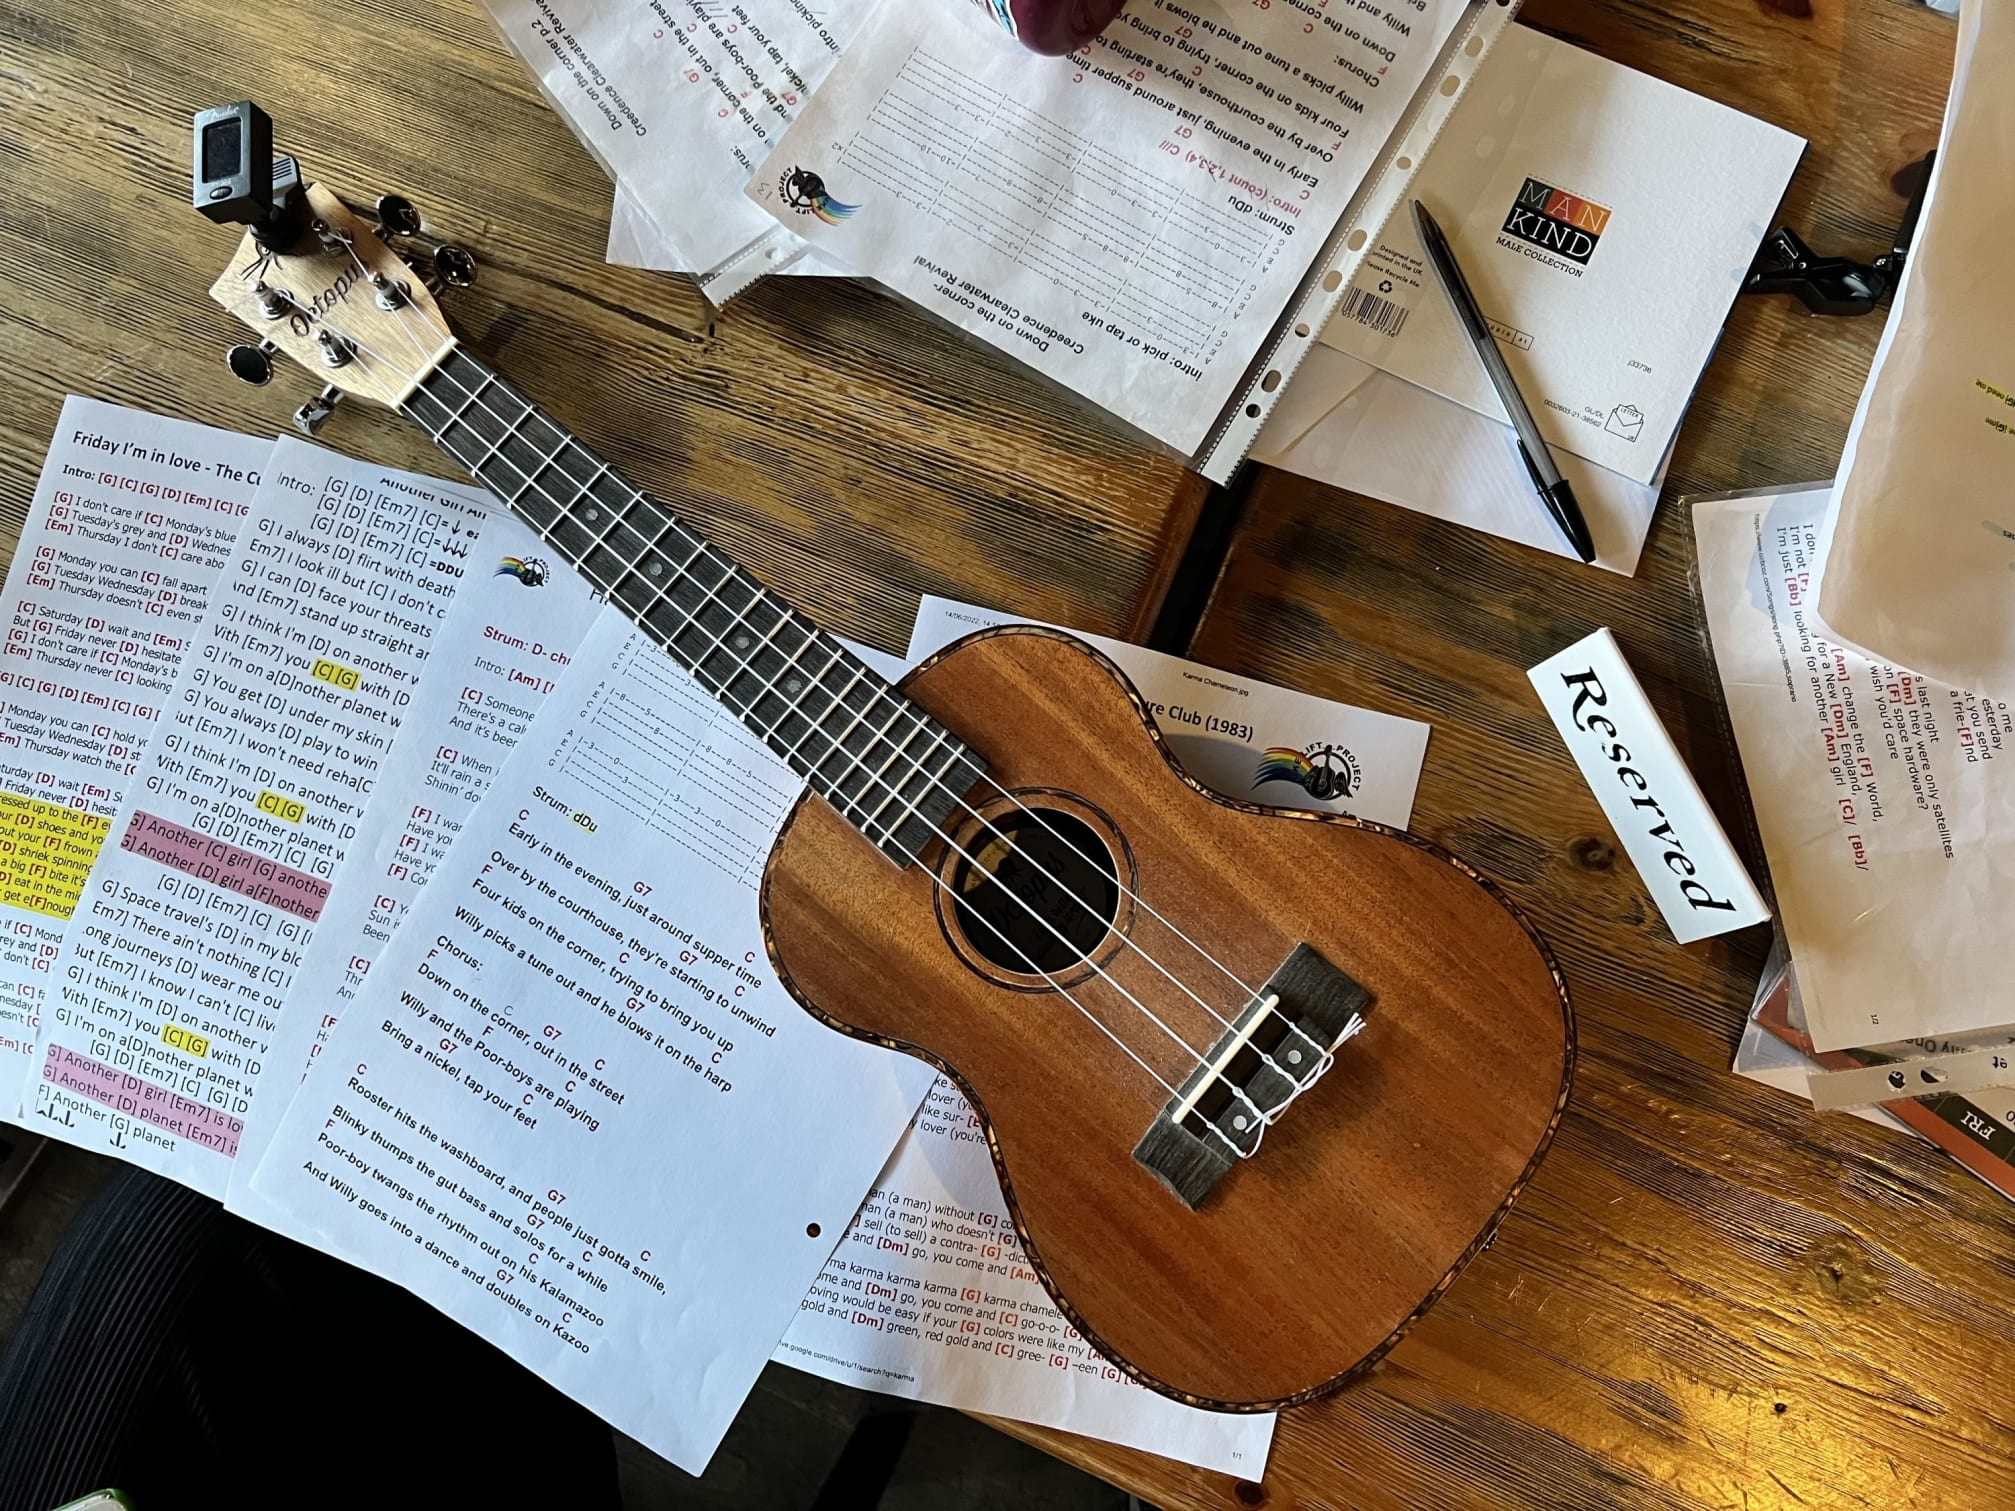 Picture of ukulele guitar and music sheets on table